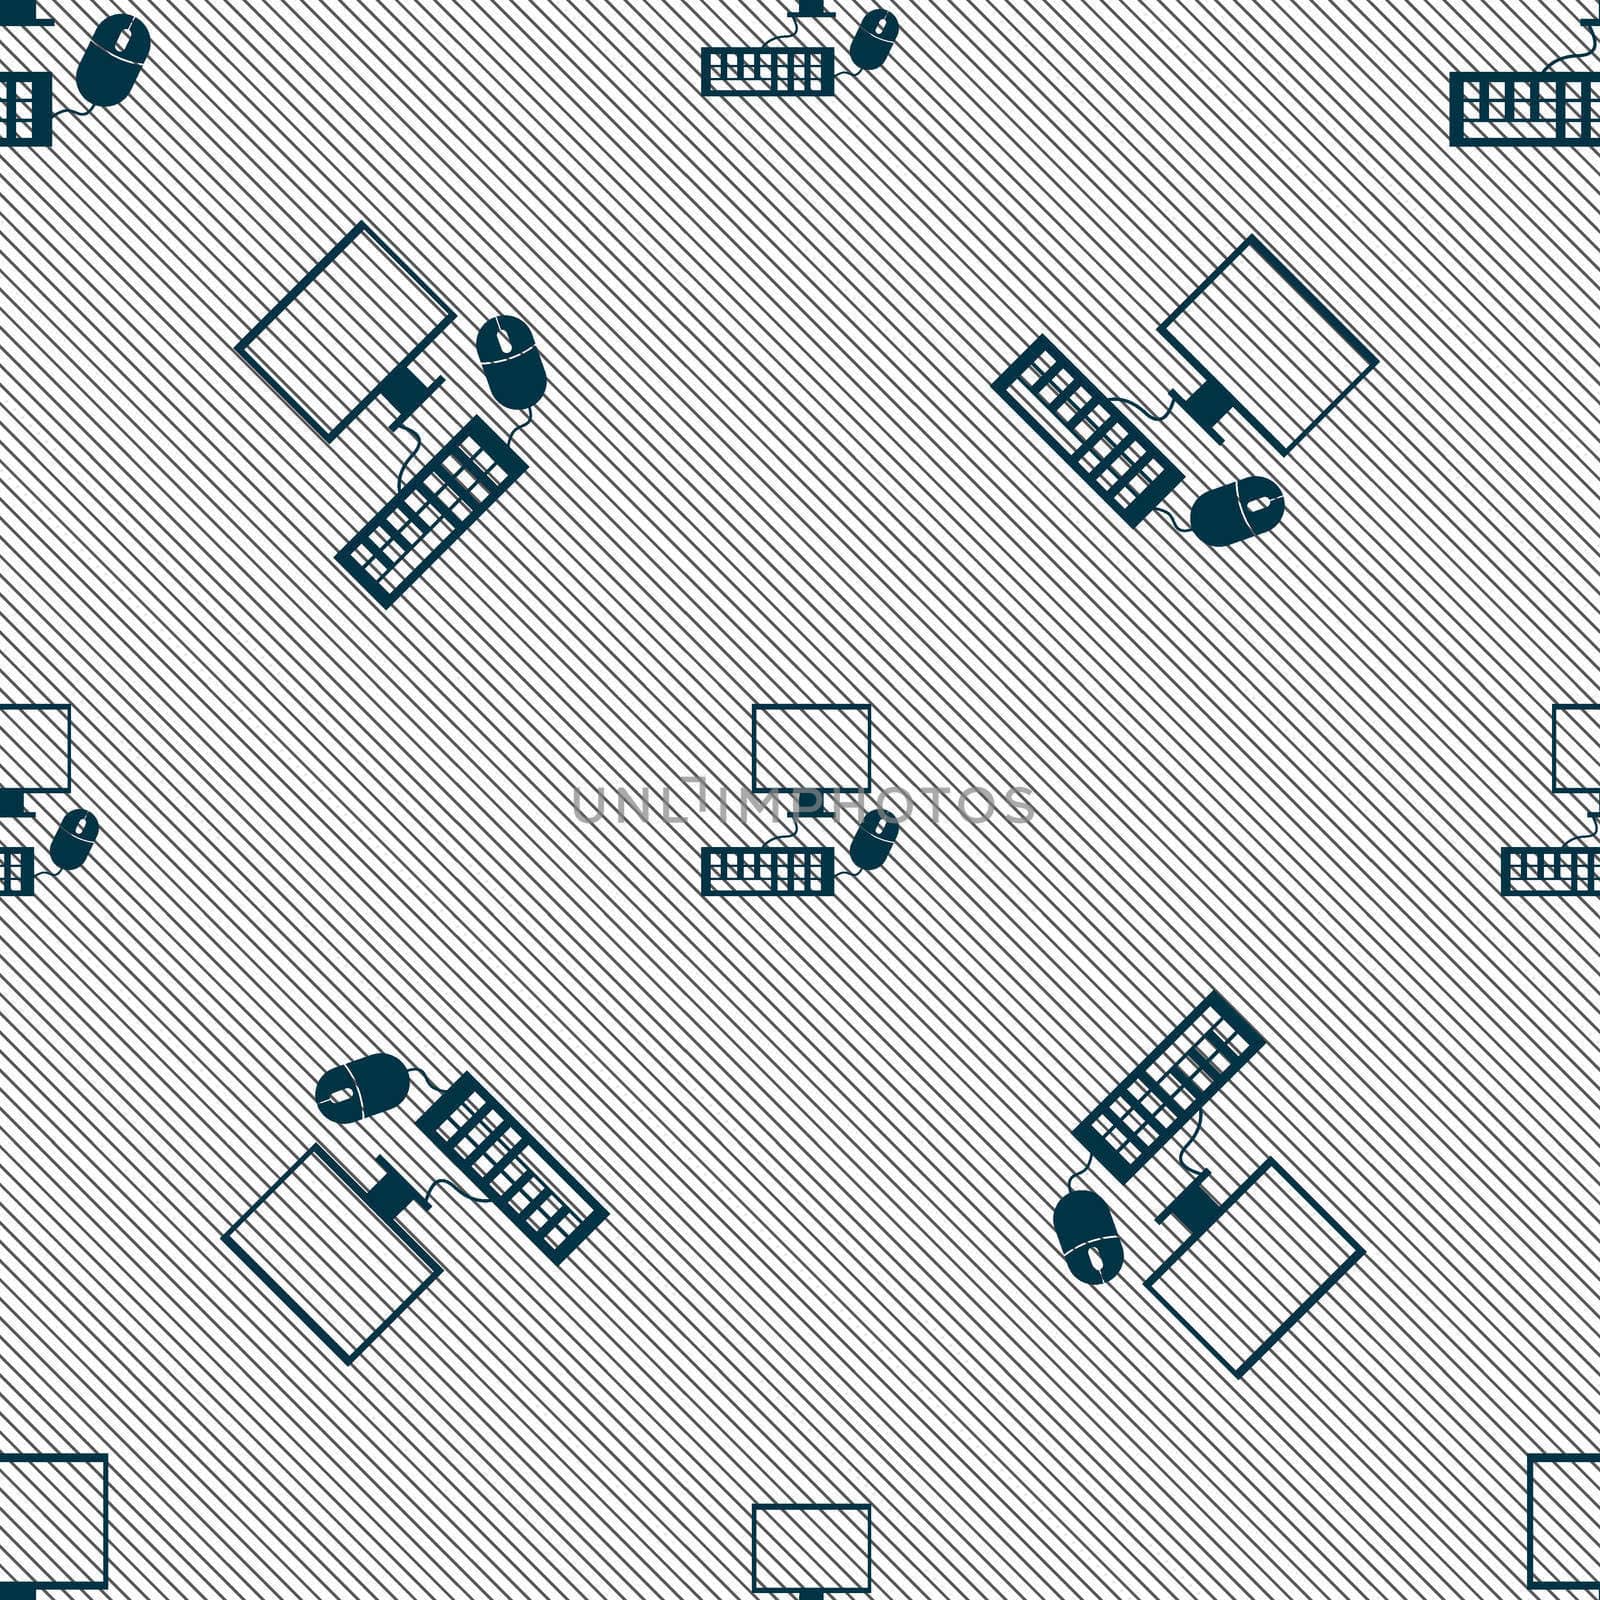 Computer widescreen monitor, keyboard, mouse sign icon. Seamless pattern with geometric texture.  by serhii_lohvyniuk